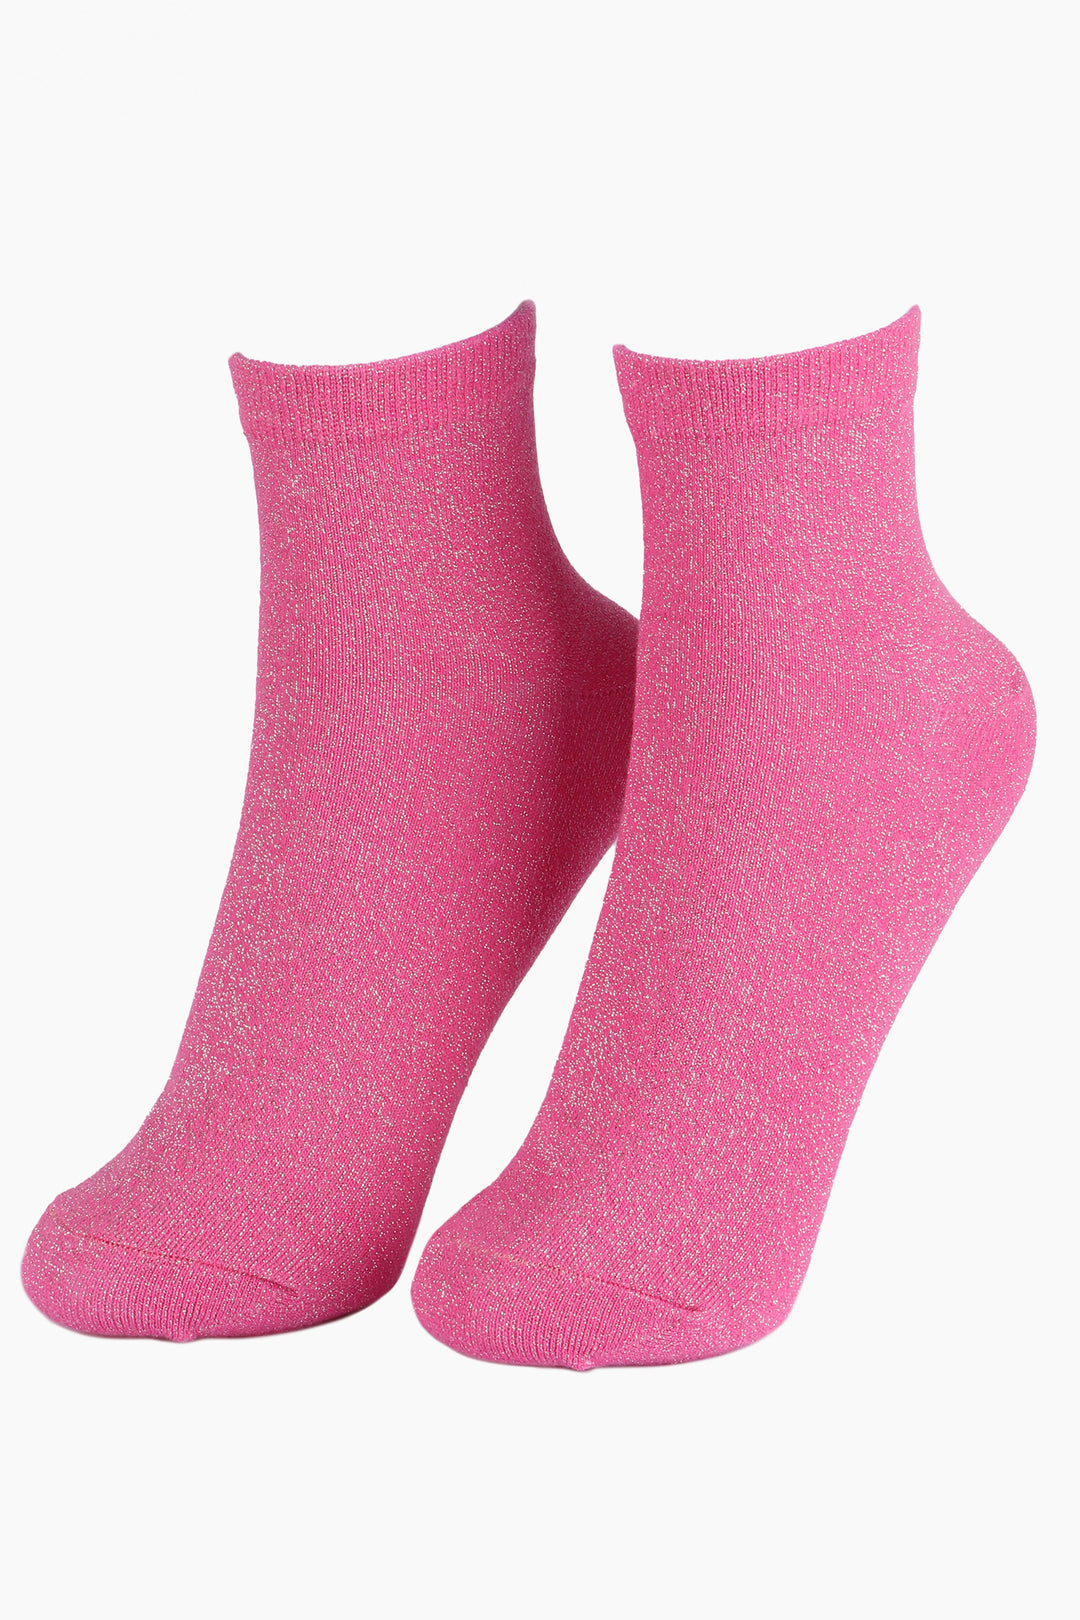 pink cotton socks with an all over silver glitter sparkle